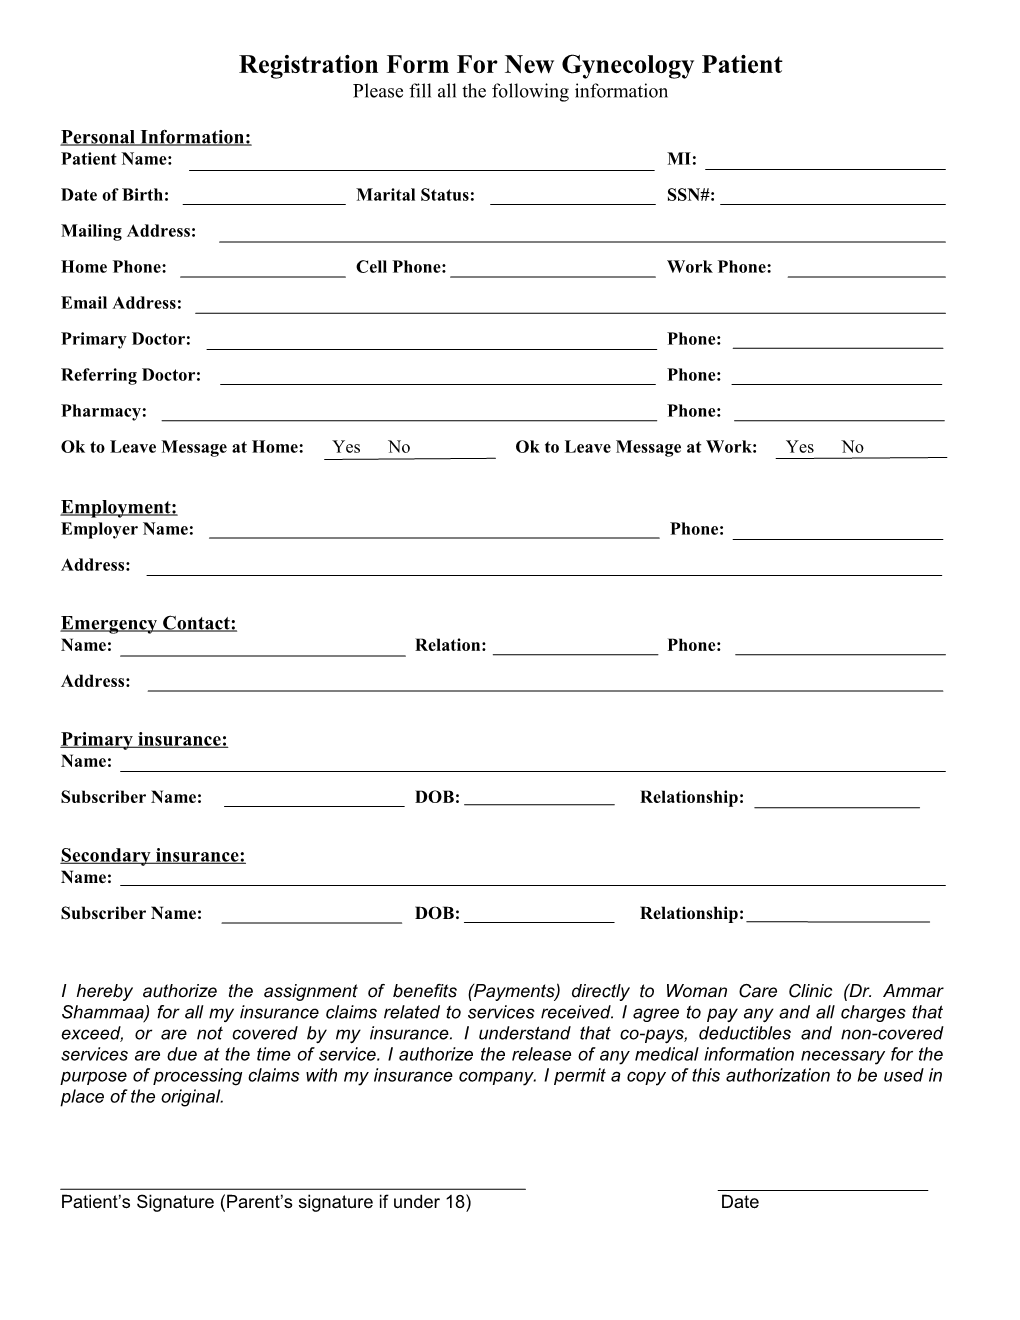 Registration Form for New Gynecology Patient